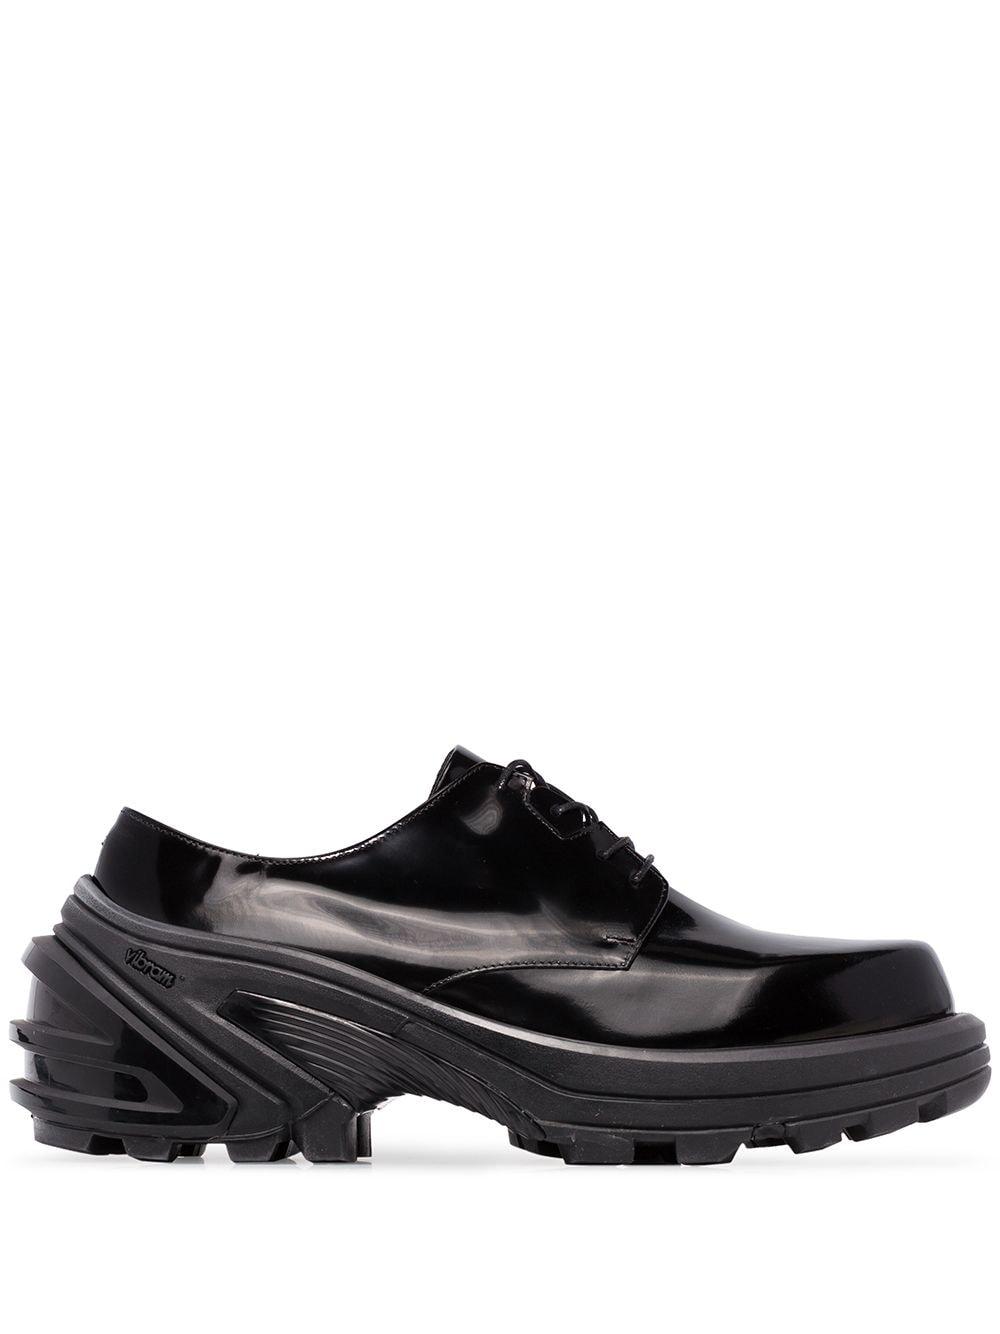 1017 ALYX 9SM Removable Vibram Sole Sneakers in Black for Men | Lyst